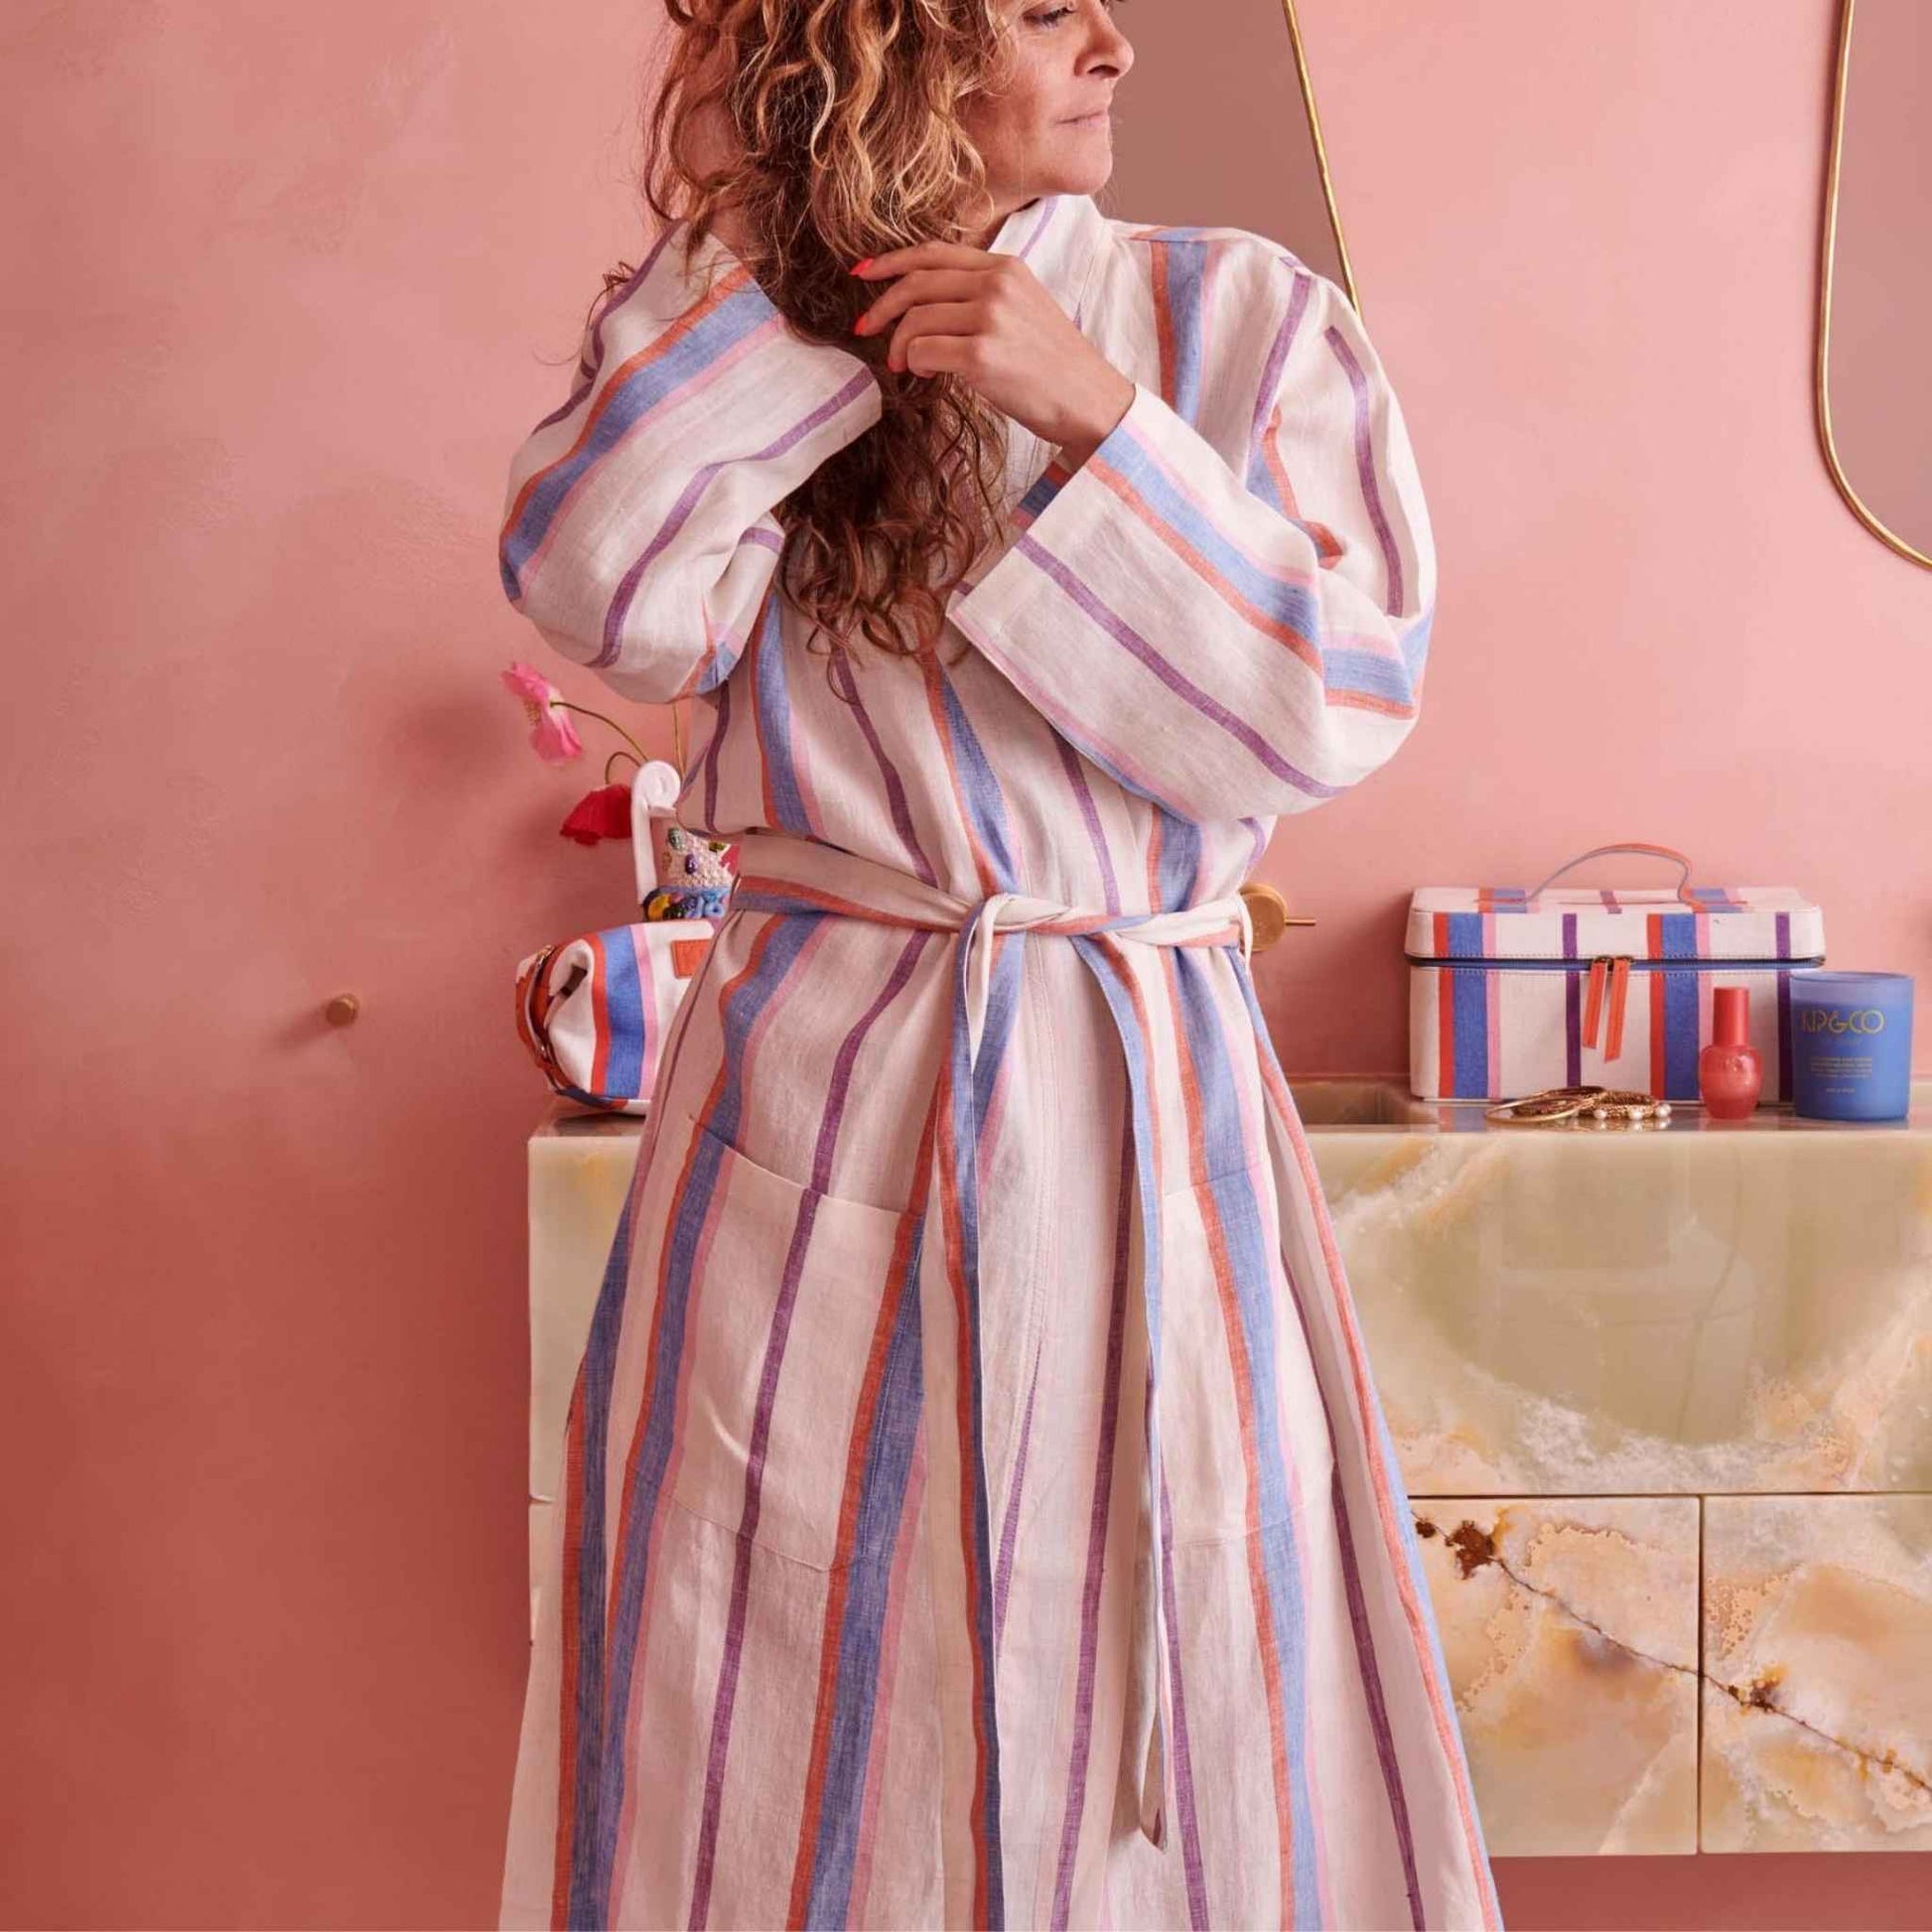  Featuring a blue, red, pink and purple stripe pattern on a white base.The Maldives Stripe Woven Linen Robe FROM KIP AND CO is the ideal light weight robe to get you through the warmer seasons.